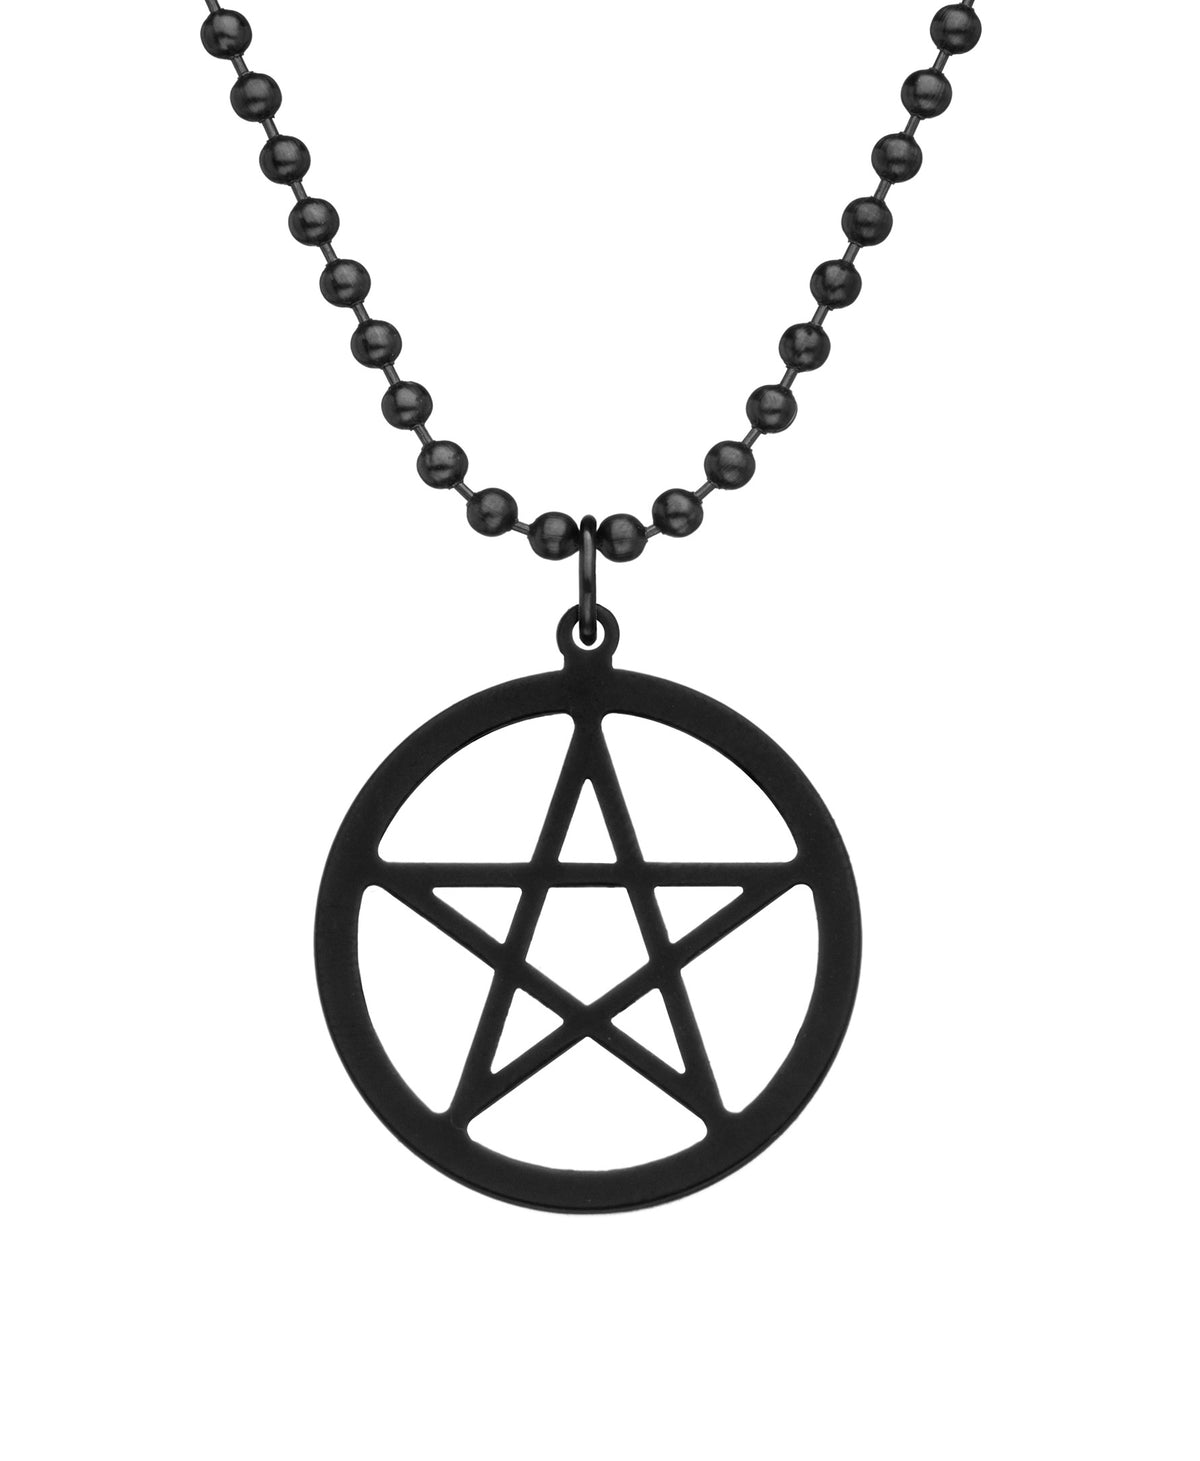 Black Titanium Pentacle Necklace with Dog Tag Chain